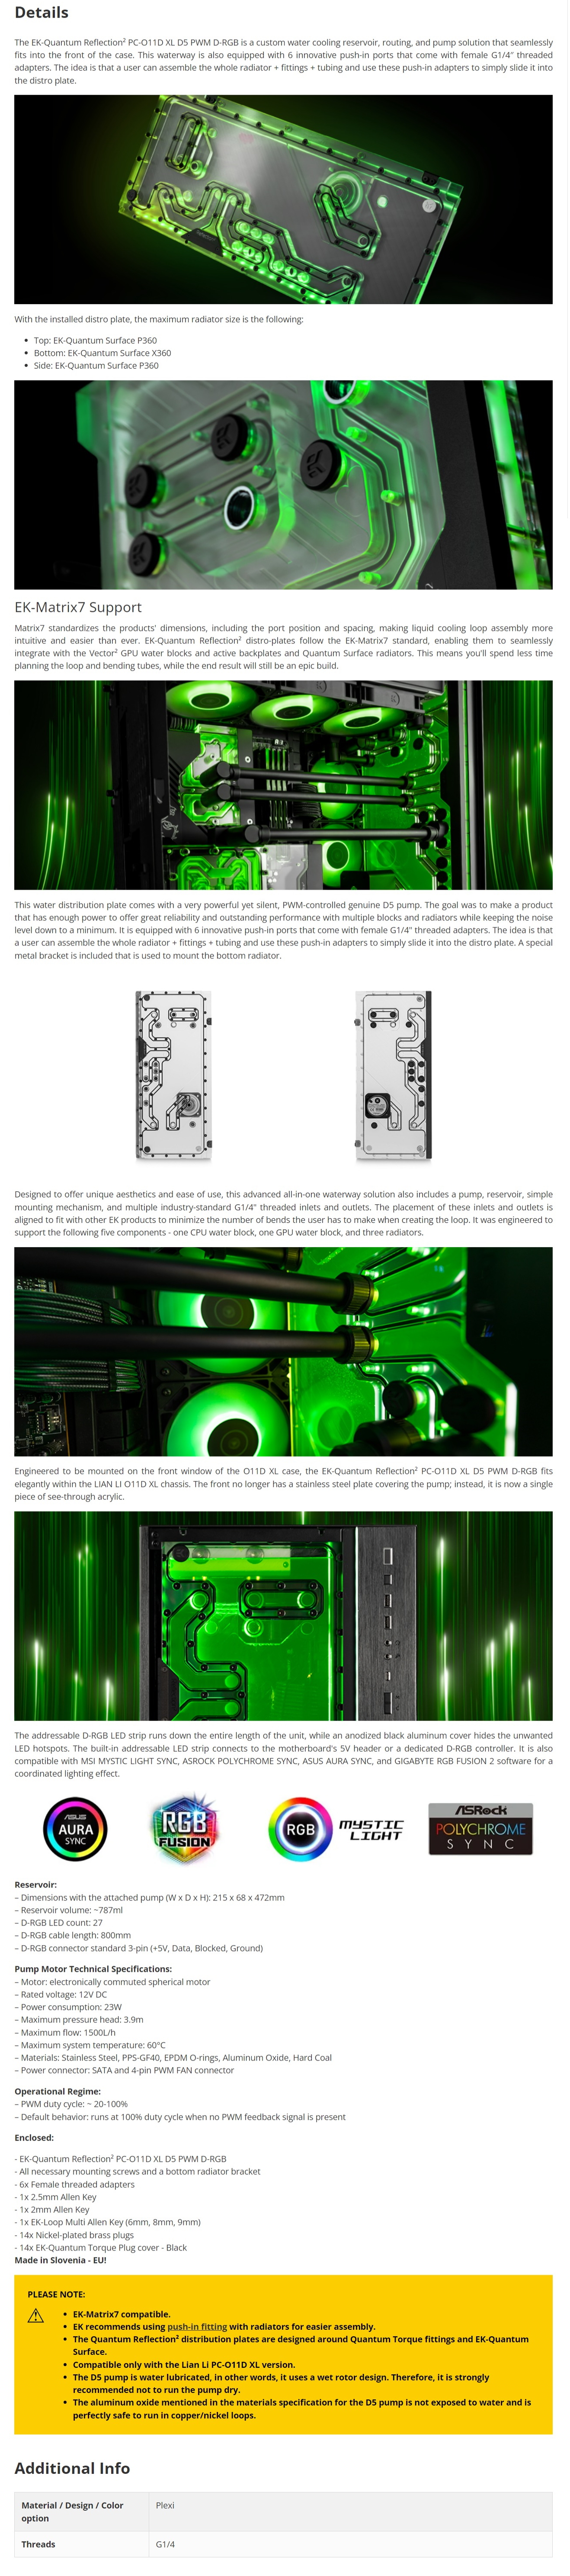 A large marketing image providing additional information about the product EK Quantum Reflection2 PC-O11D XL D5 PWM D-RGB Plexi - Distribution Block - Additional alt info not provided